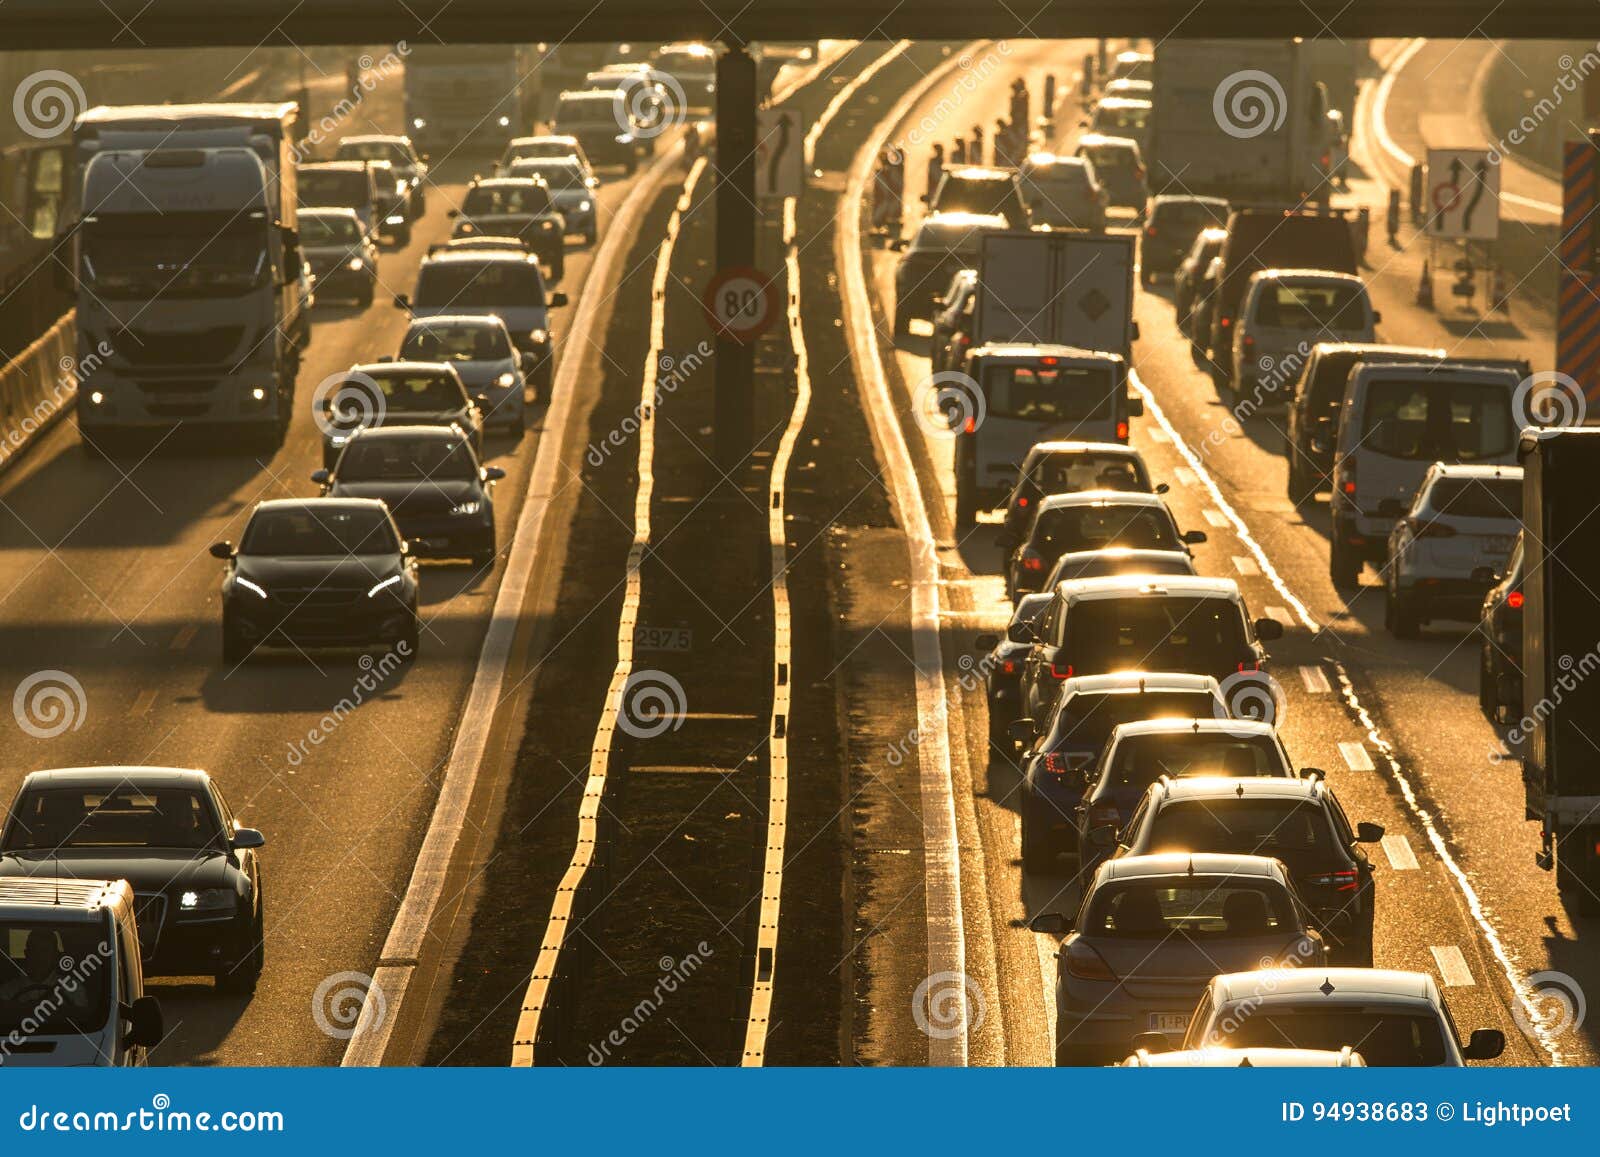 cars going very slowly in a traffic jam during the morning rushhour